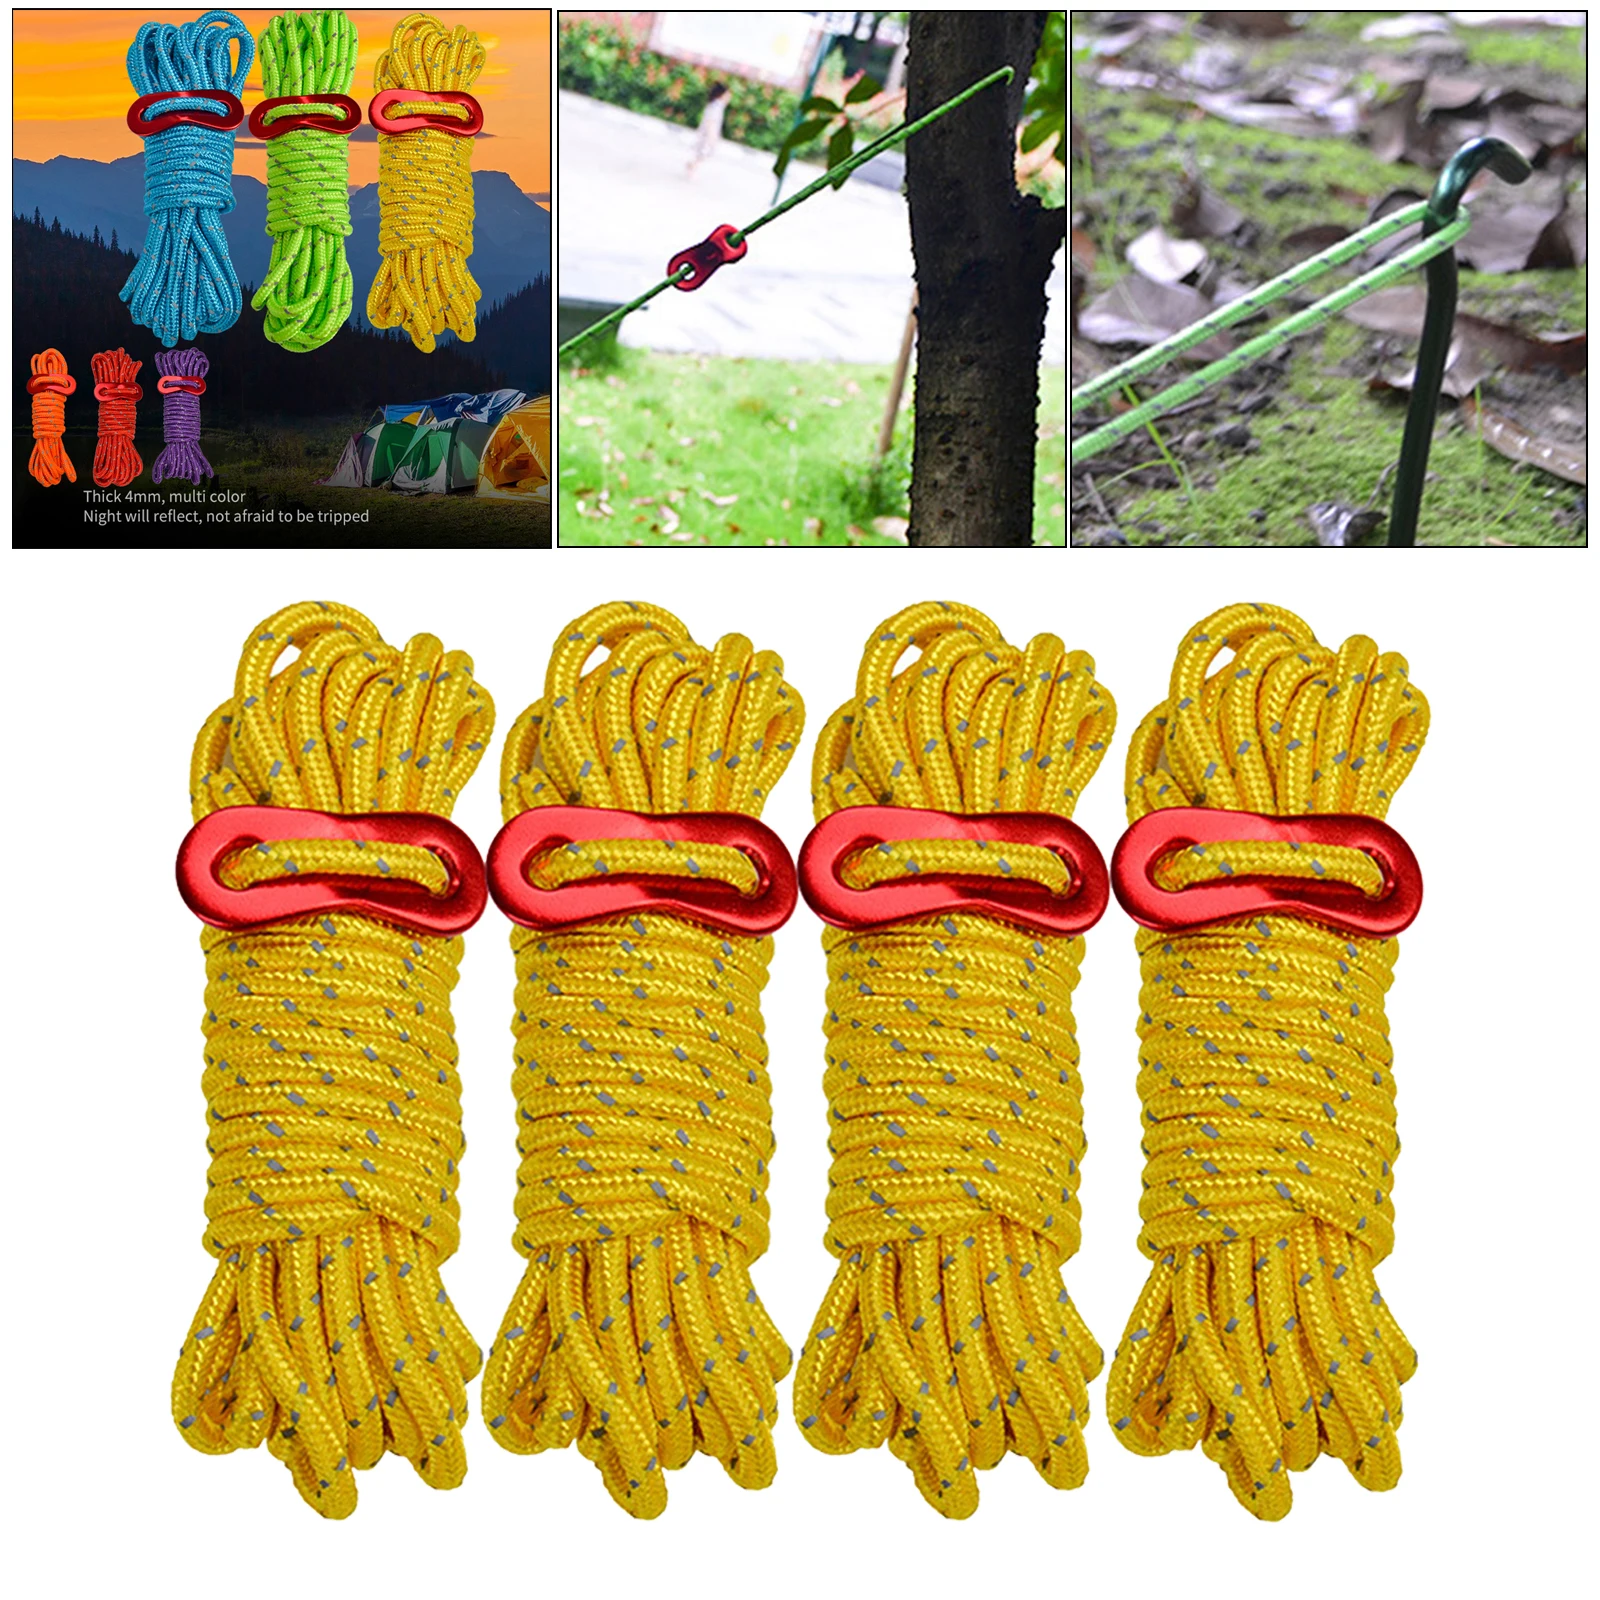 4 Pieces 4mm Fluorescent Reflective Guyline Tent Rope Camping Cord Paracord, 13 Feet